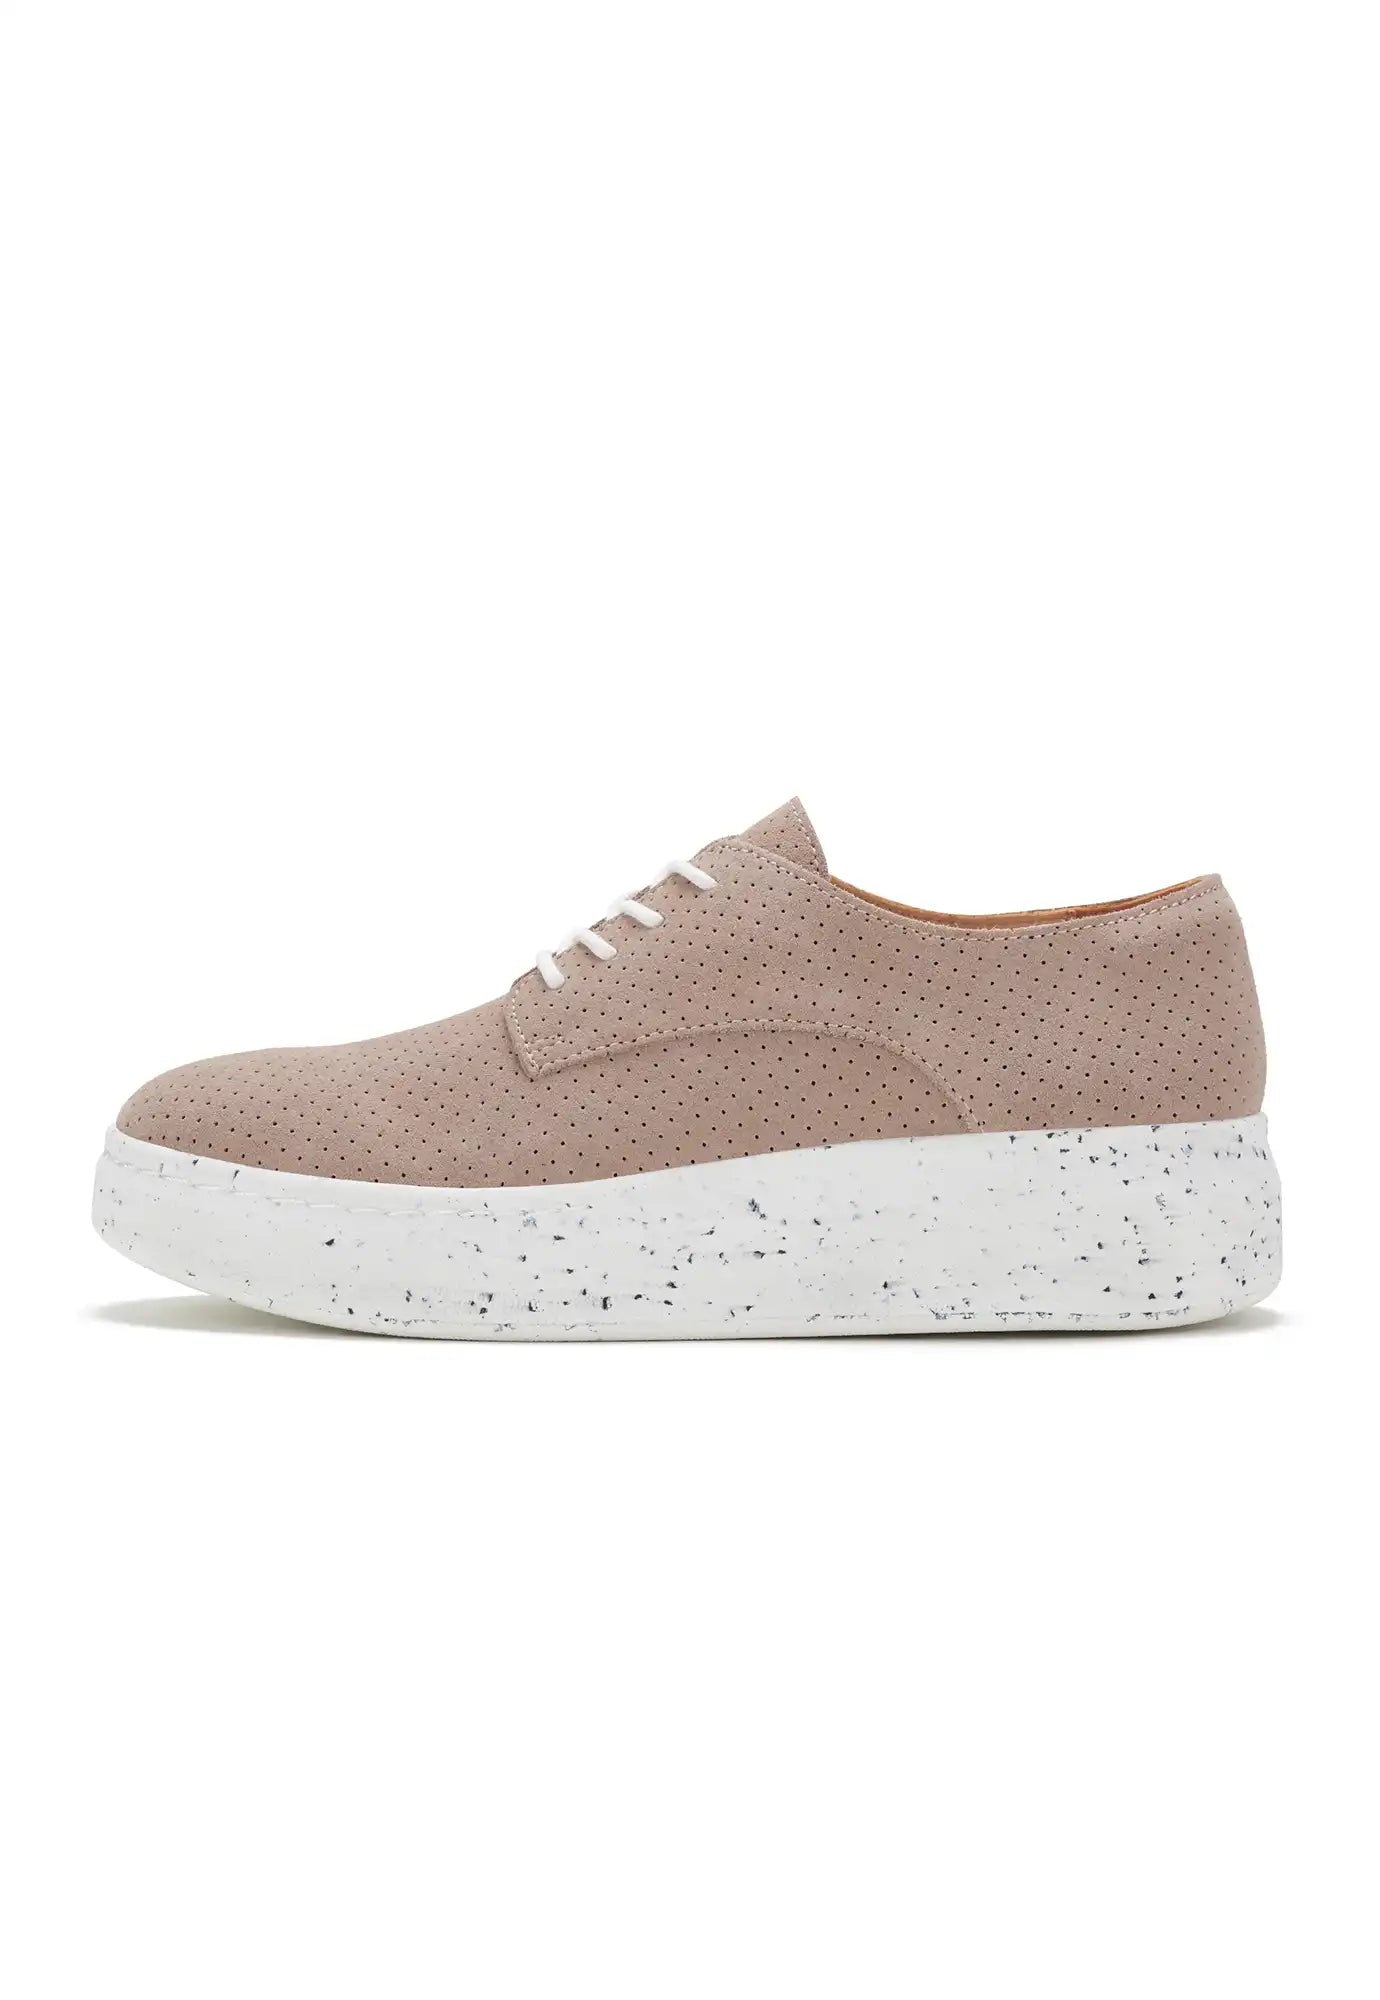 rollie - derby city - pin punch - taupe suede